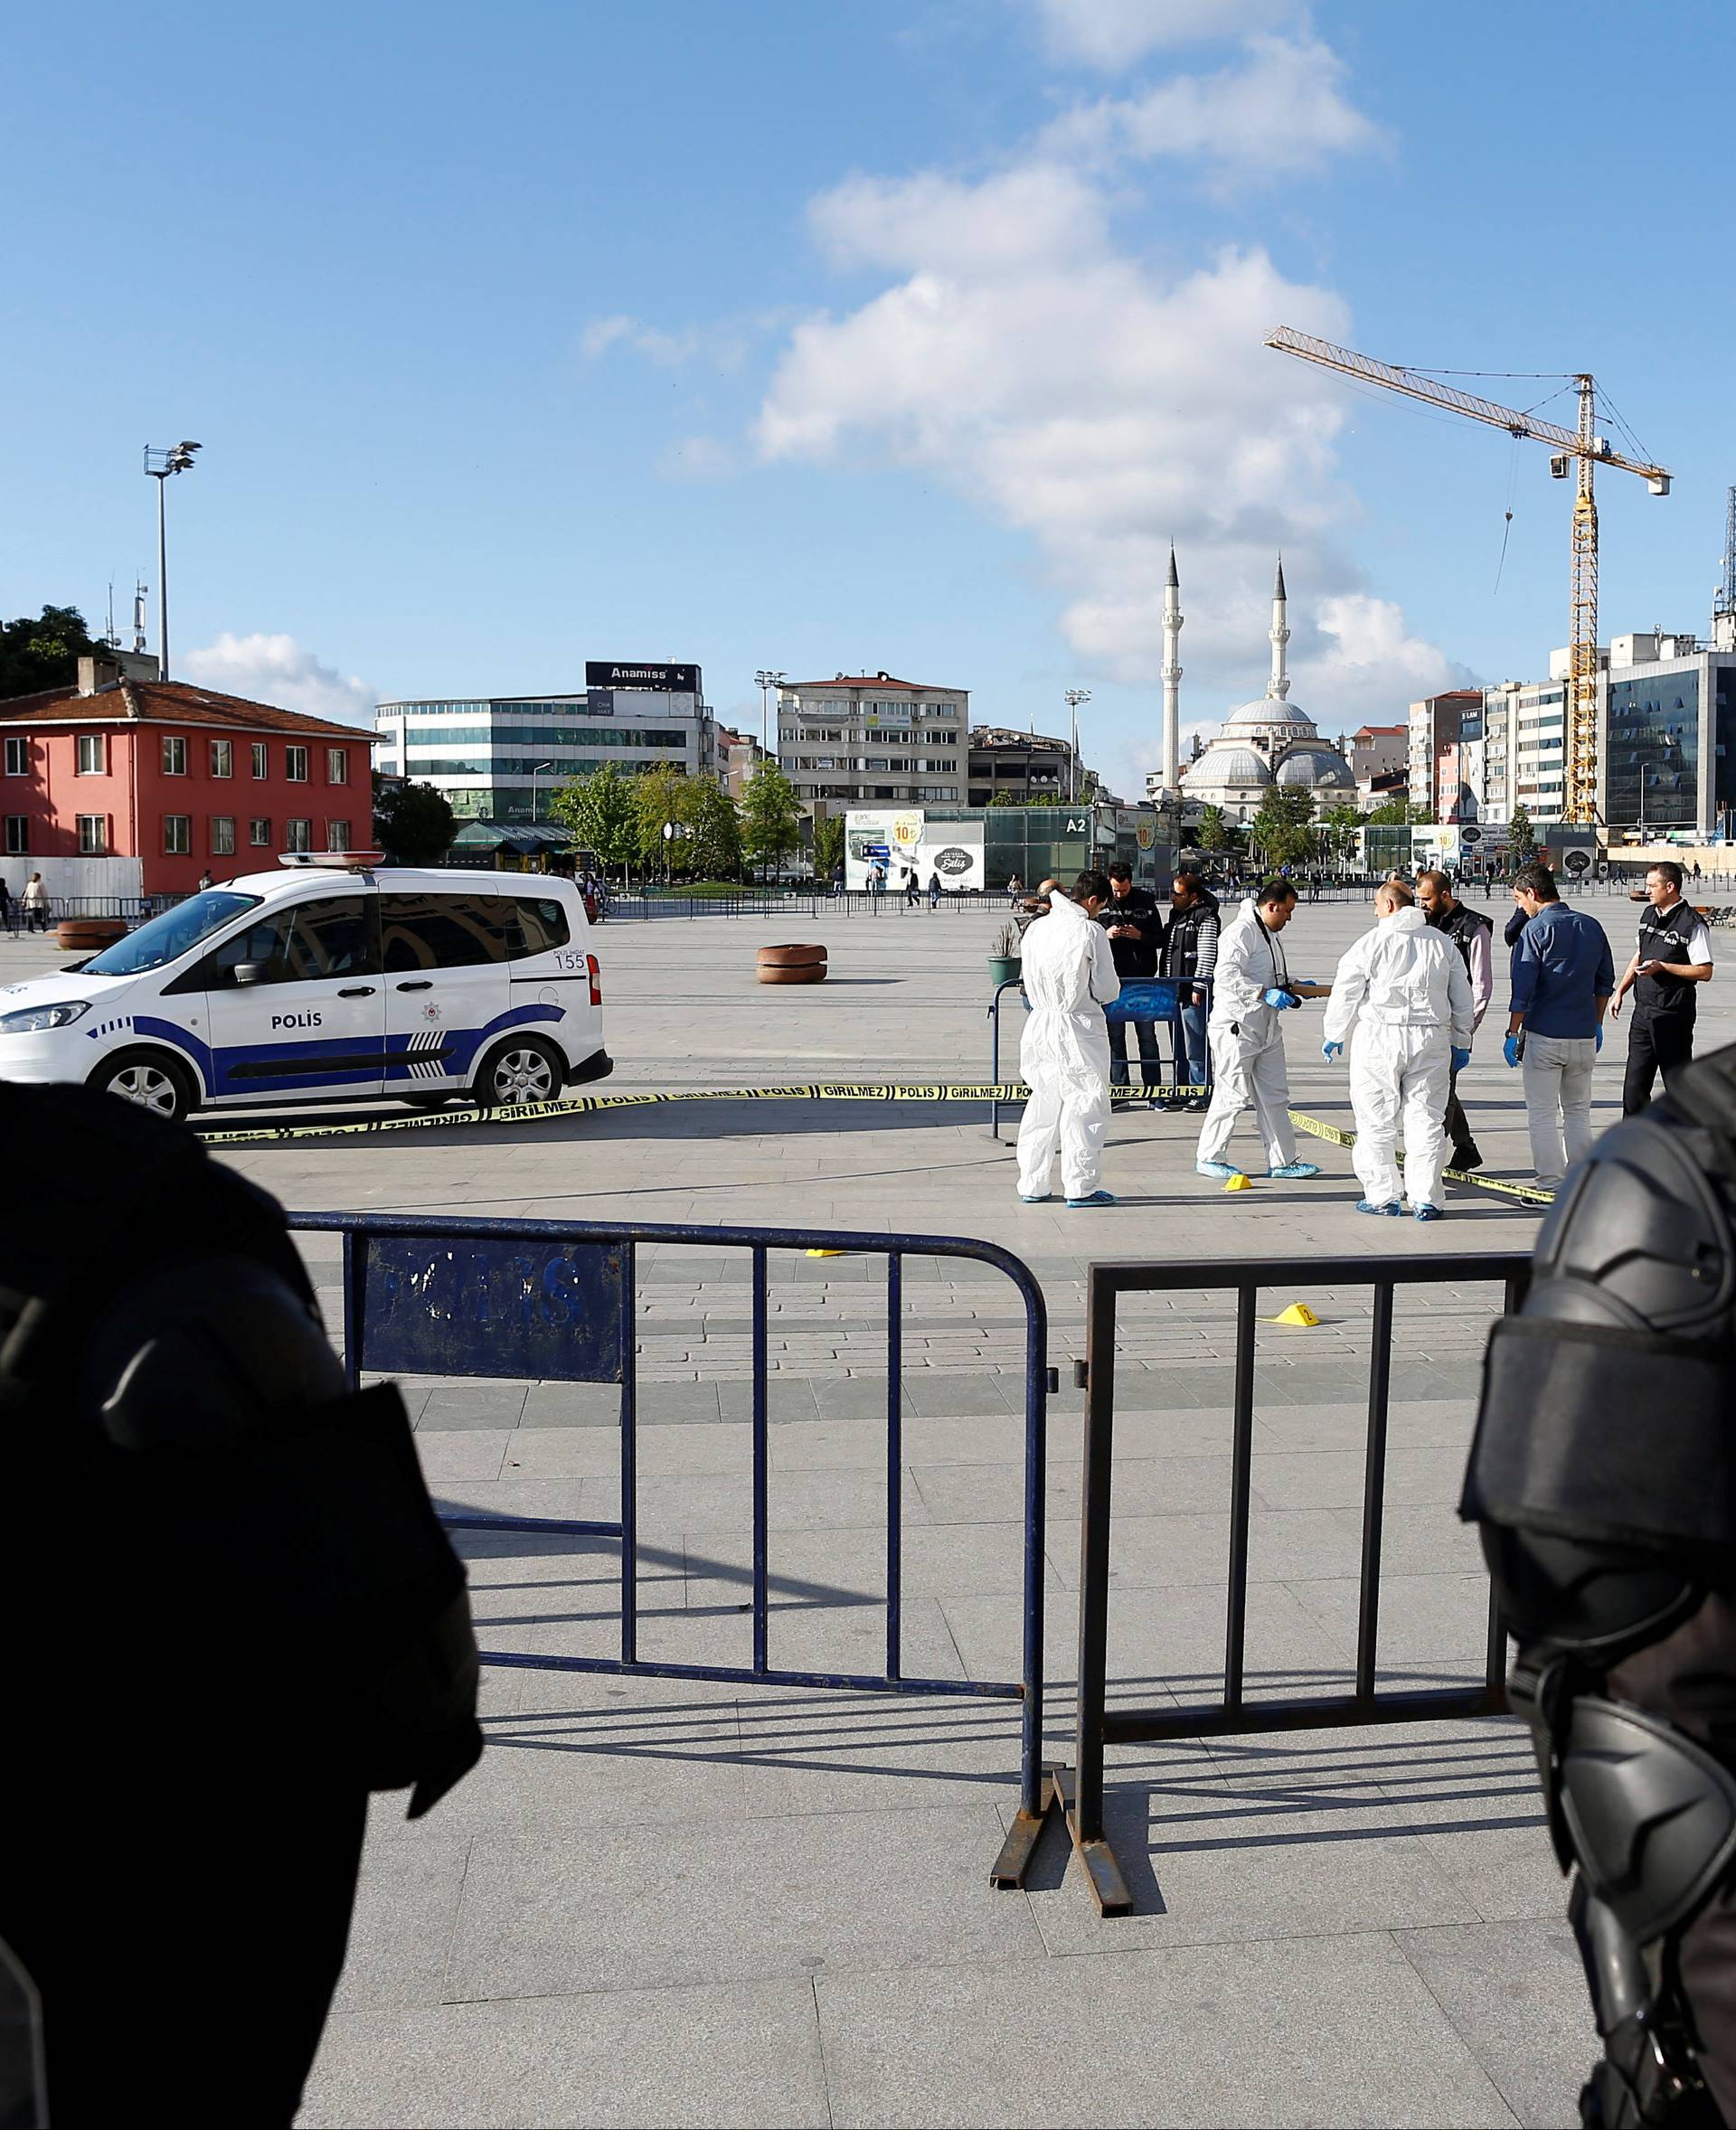 Turkish riot policemen secure the area as forensic officers inspect the area after an attack aganist Can Dundar, editor-in-chief of Cumhuriyet in front of the Justice Palace in Istanbul